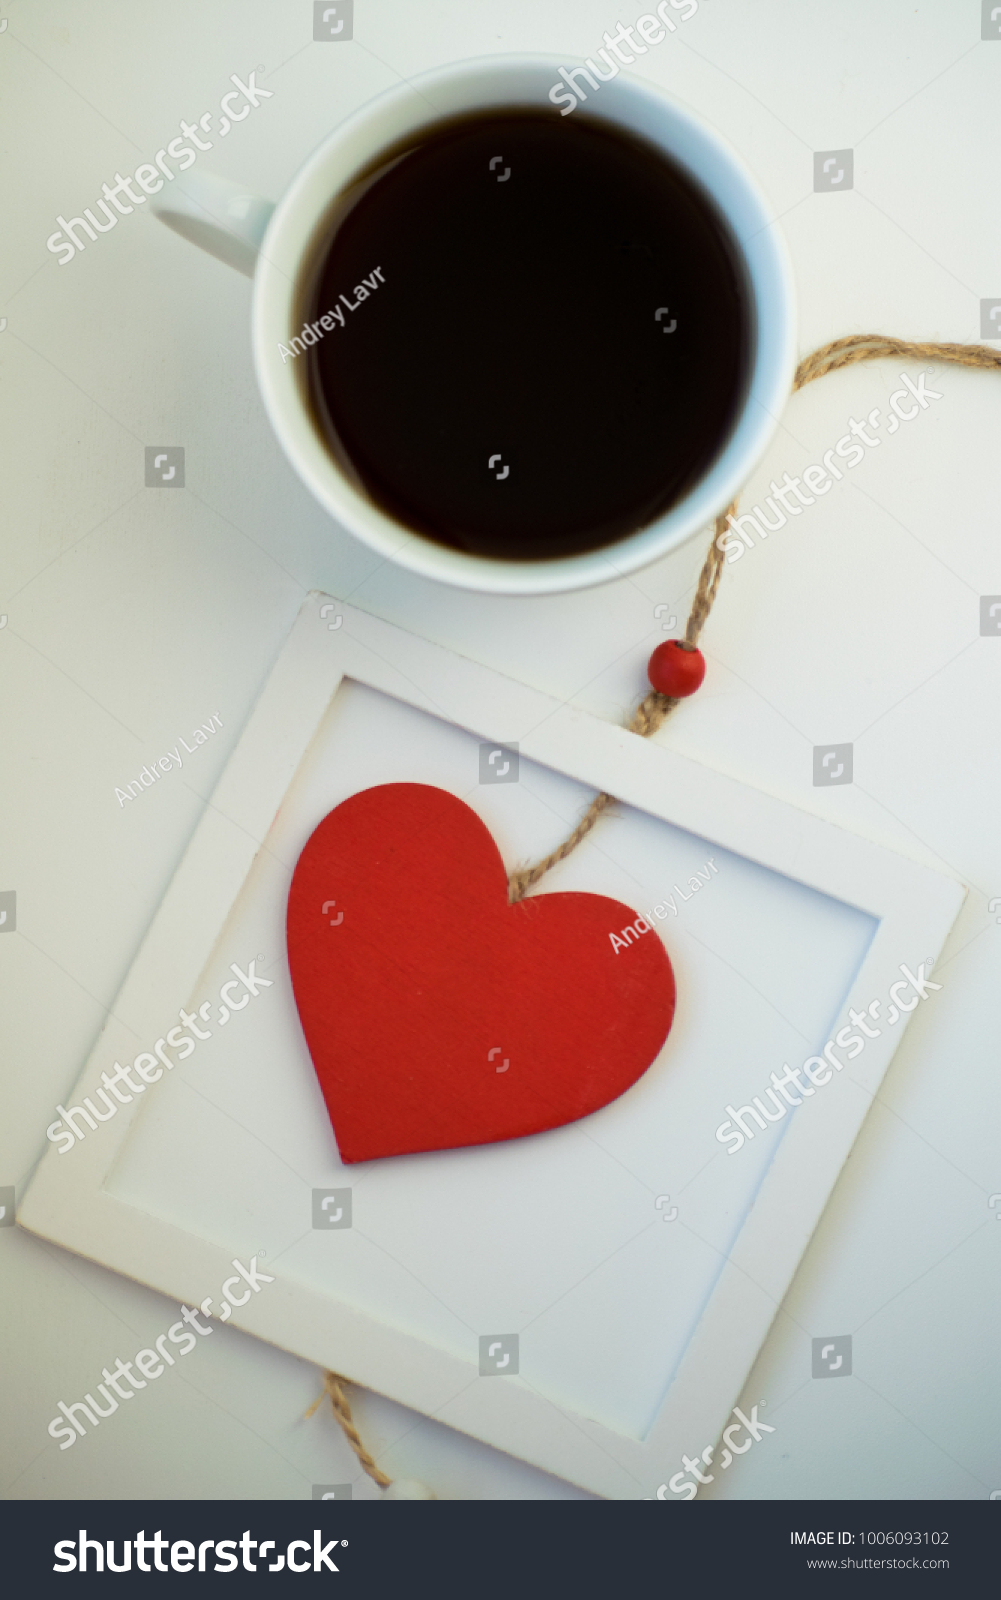 Cup of love, coffee with red heart. Red heart on a rope in the wooden frame. Valentine's day. Morning. The 14th of February. #1006093102